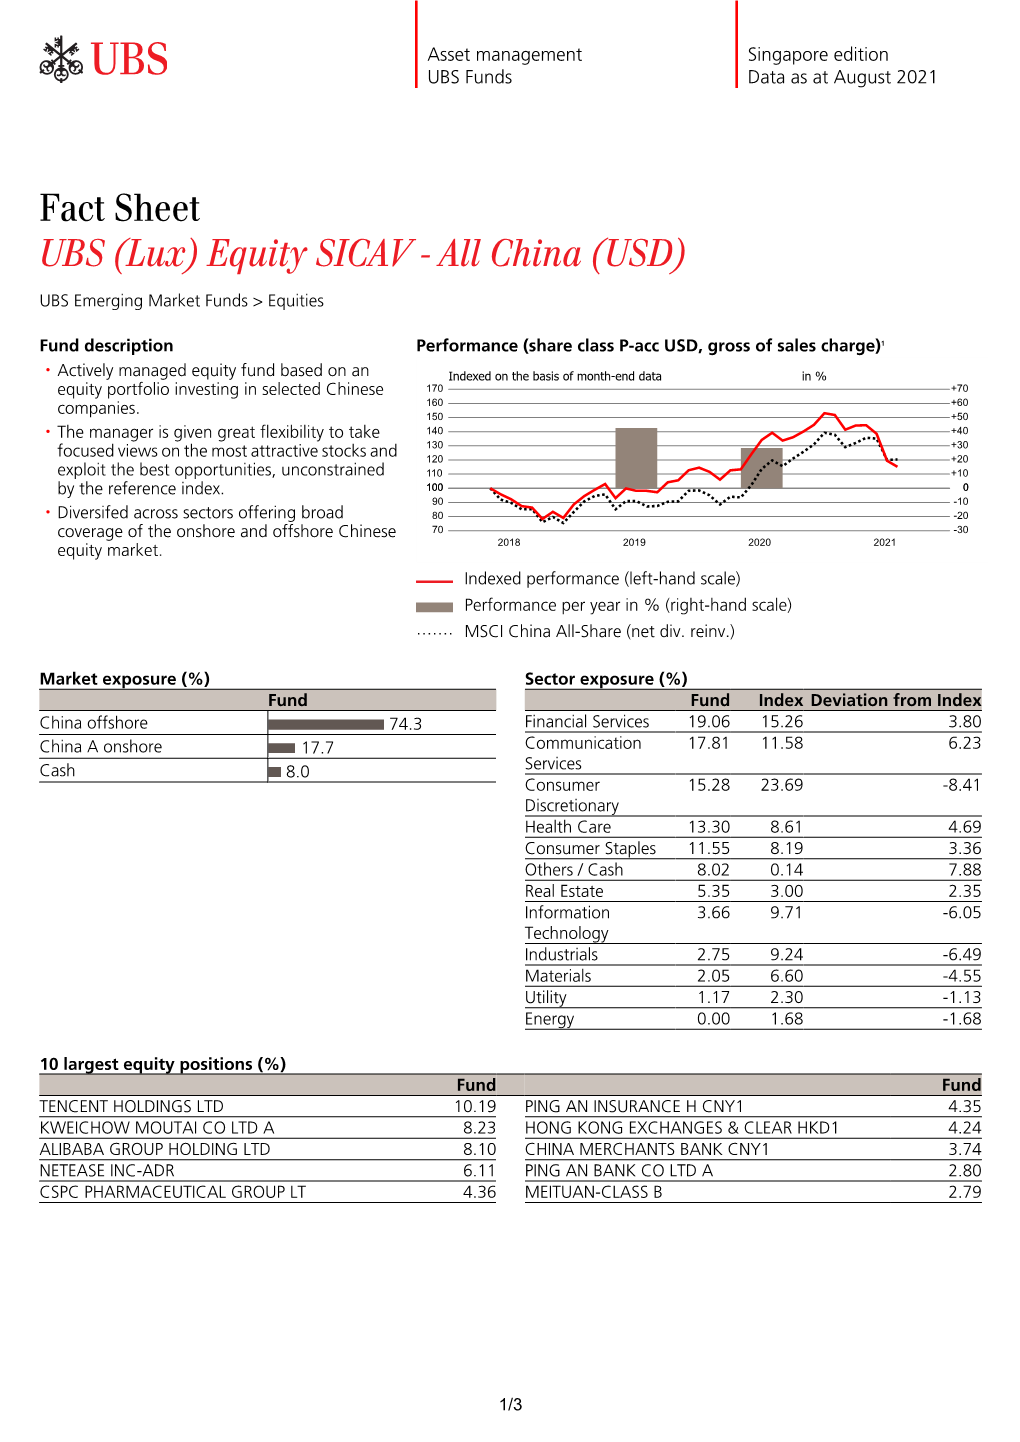 Fact Sheet UBS (Lux) Equity SICAV - All China (USD)